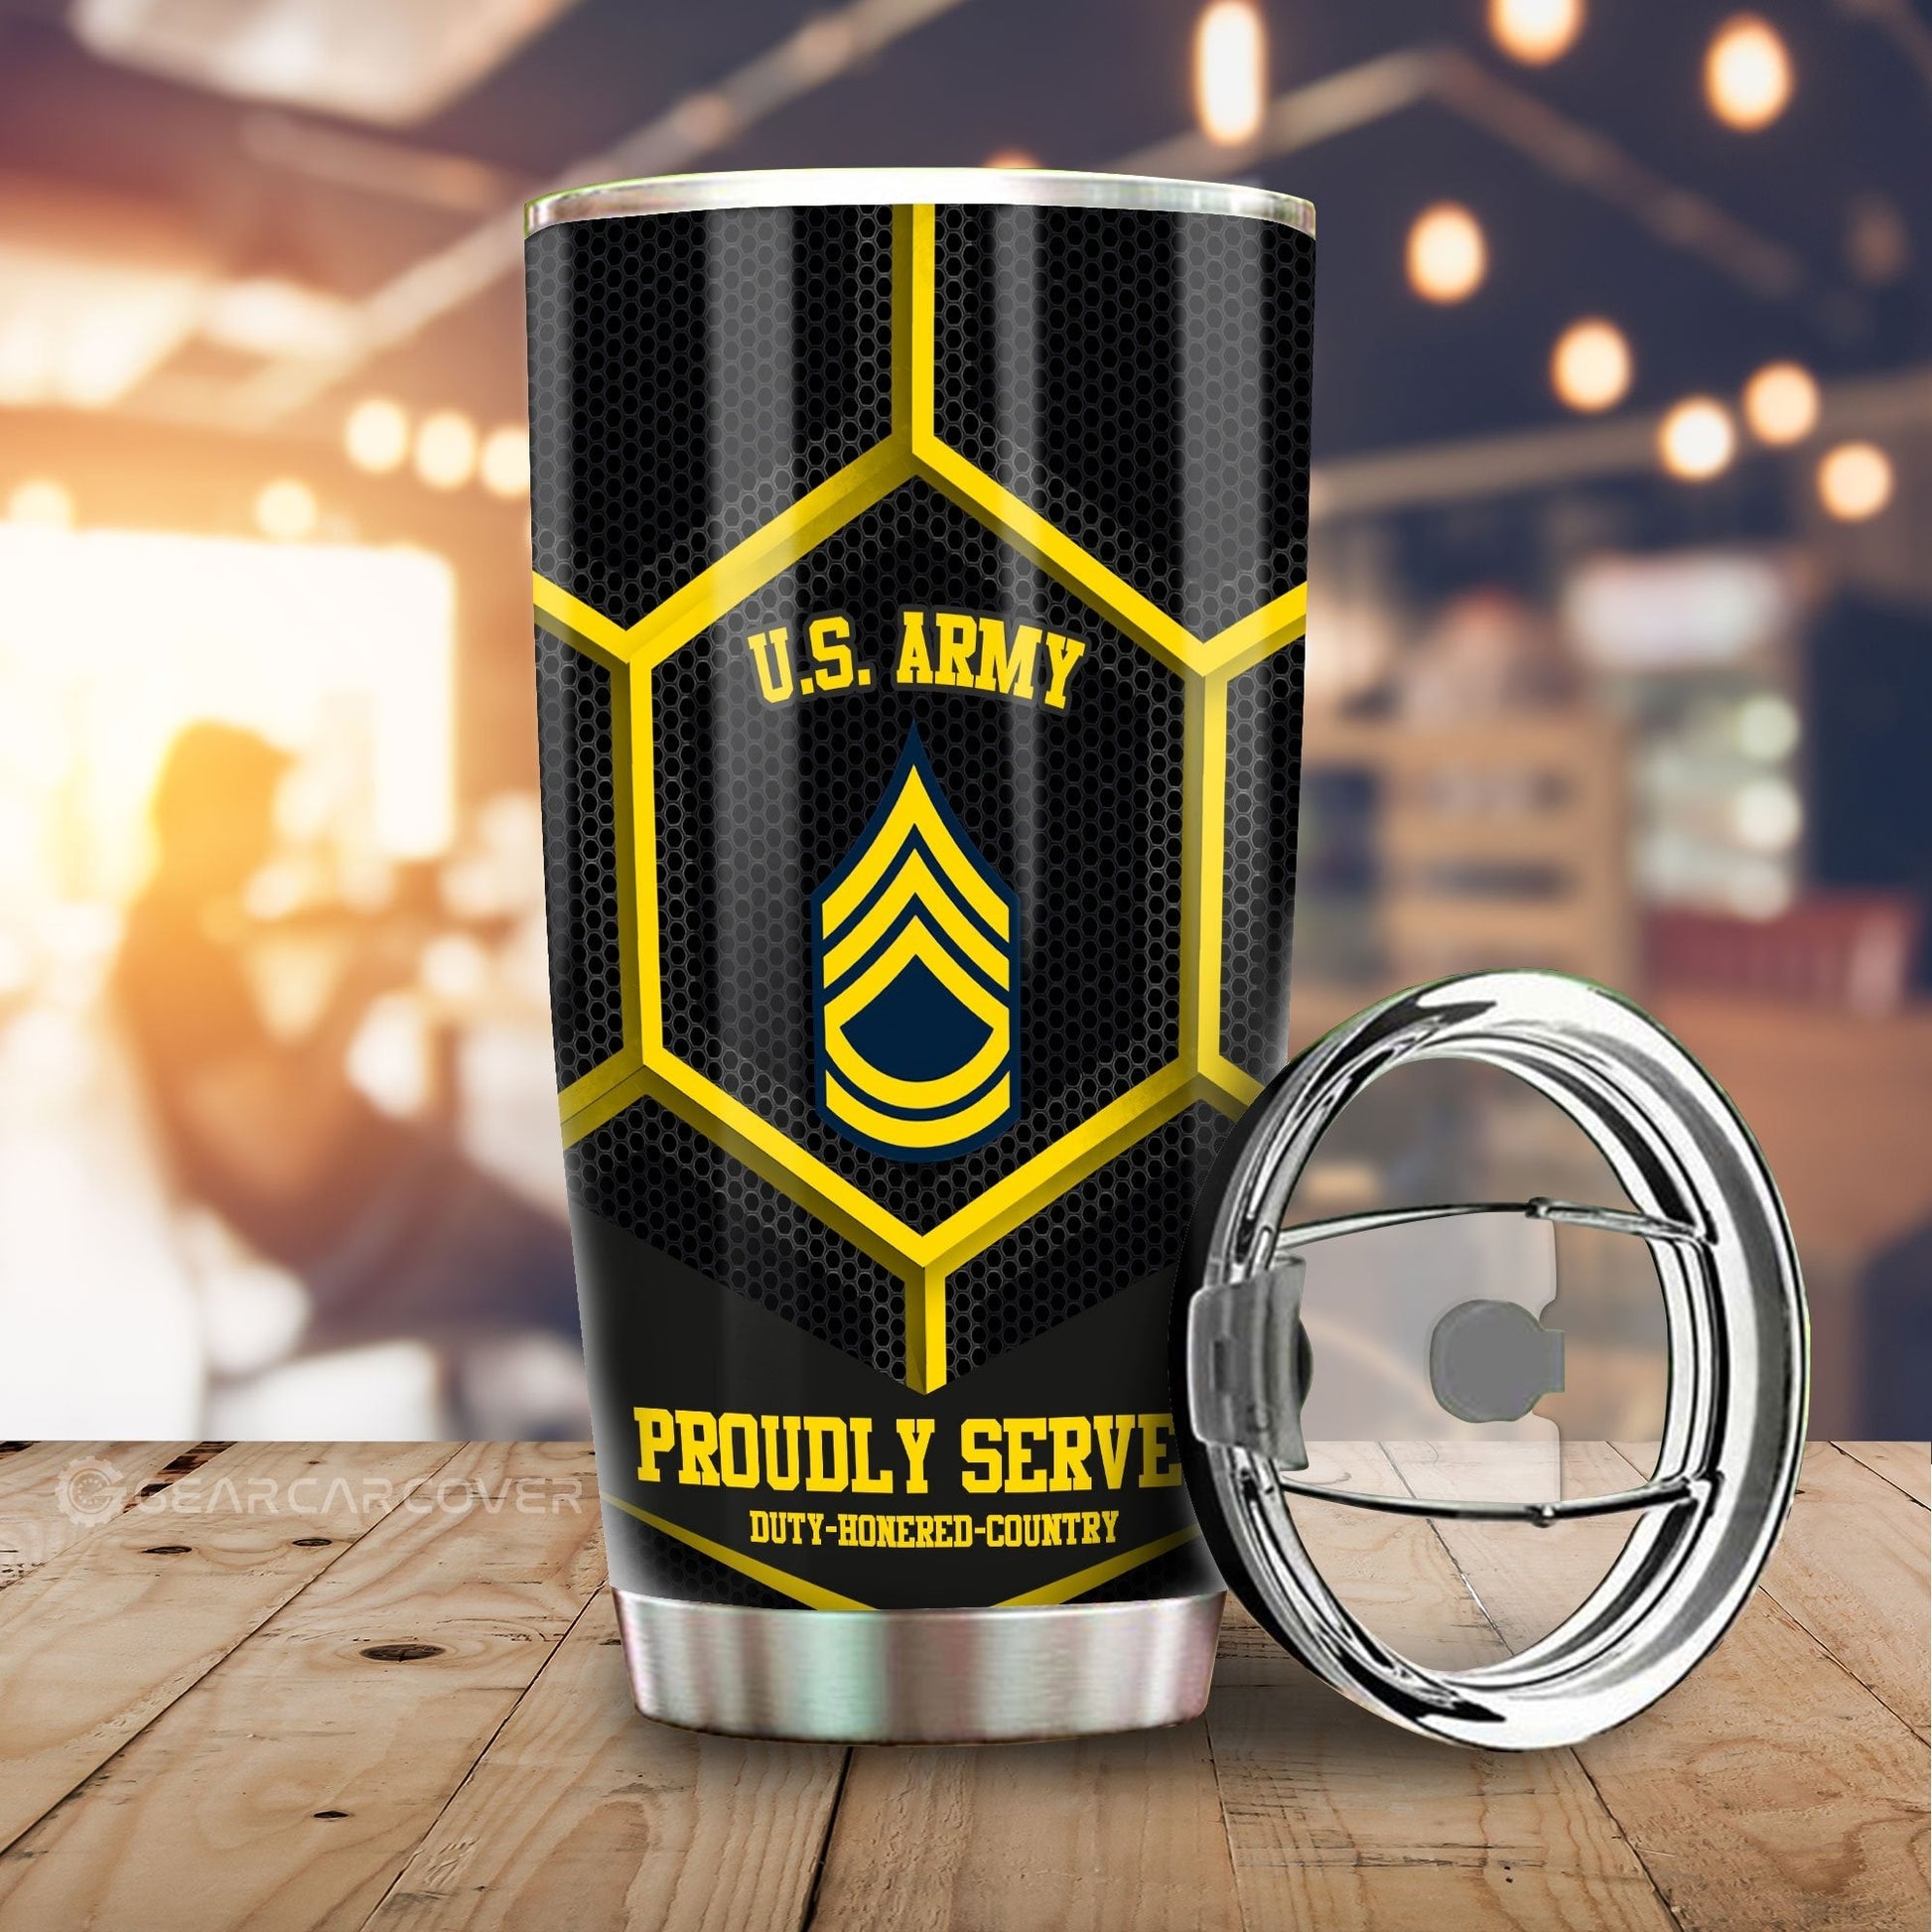 Personalized U.S Army Veterans Tumbler Cup Customized Name US Military Car Accessories - Gearcarcover - 2